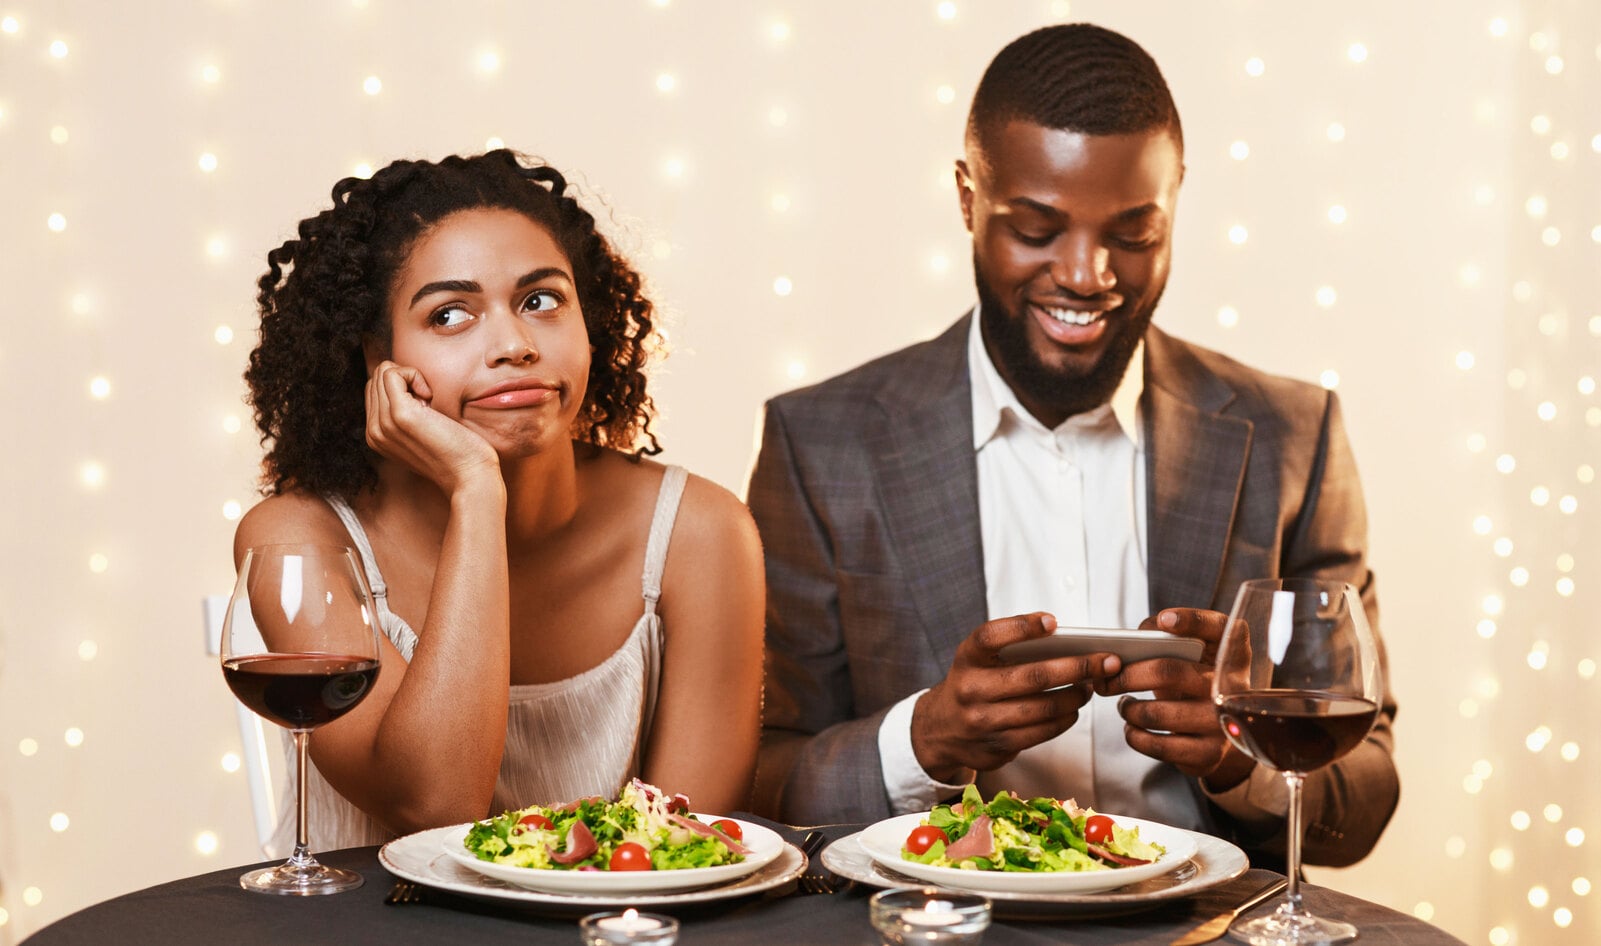 Sweet Earth Teams up With OkCupid to Explore Veggie Dating Dilemmas&nbsp;